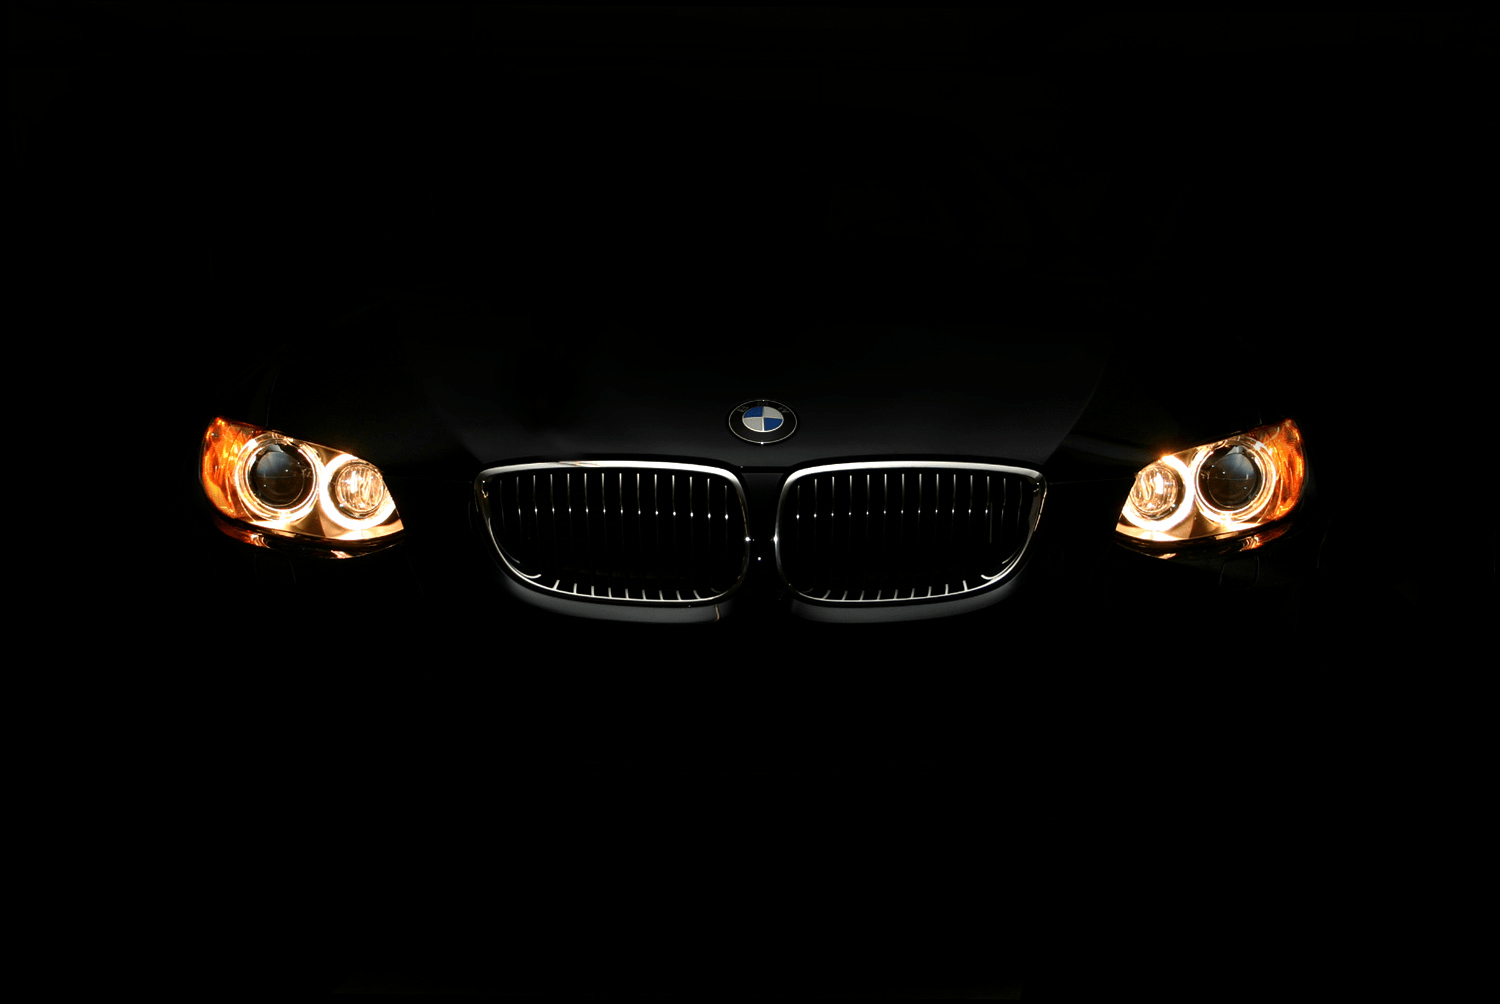 Post your favorite BMW wallpaper For those of us who need a new